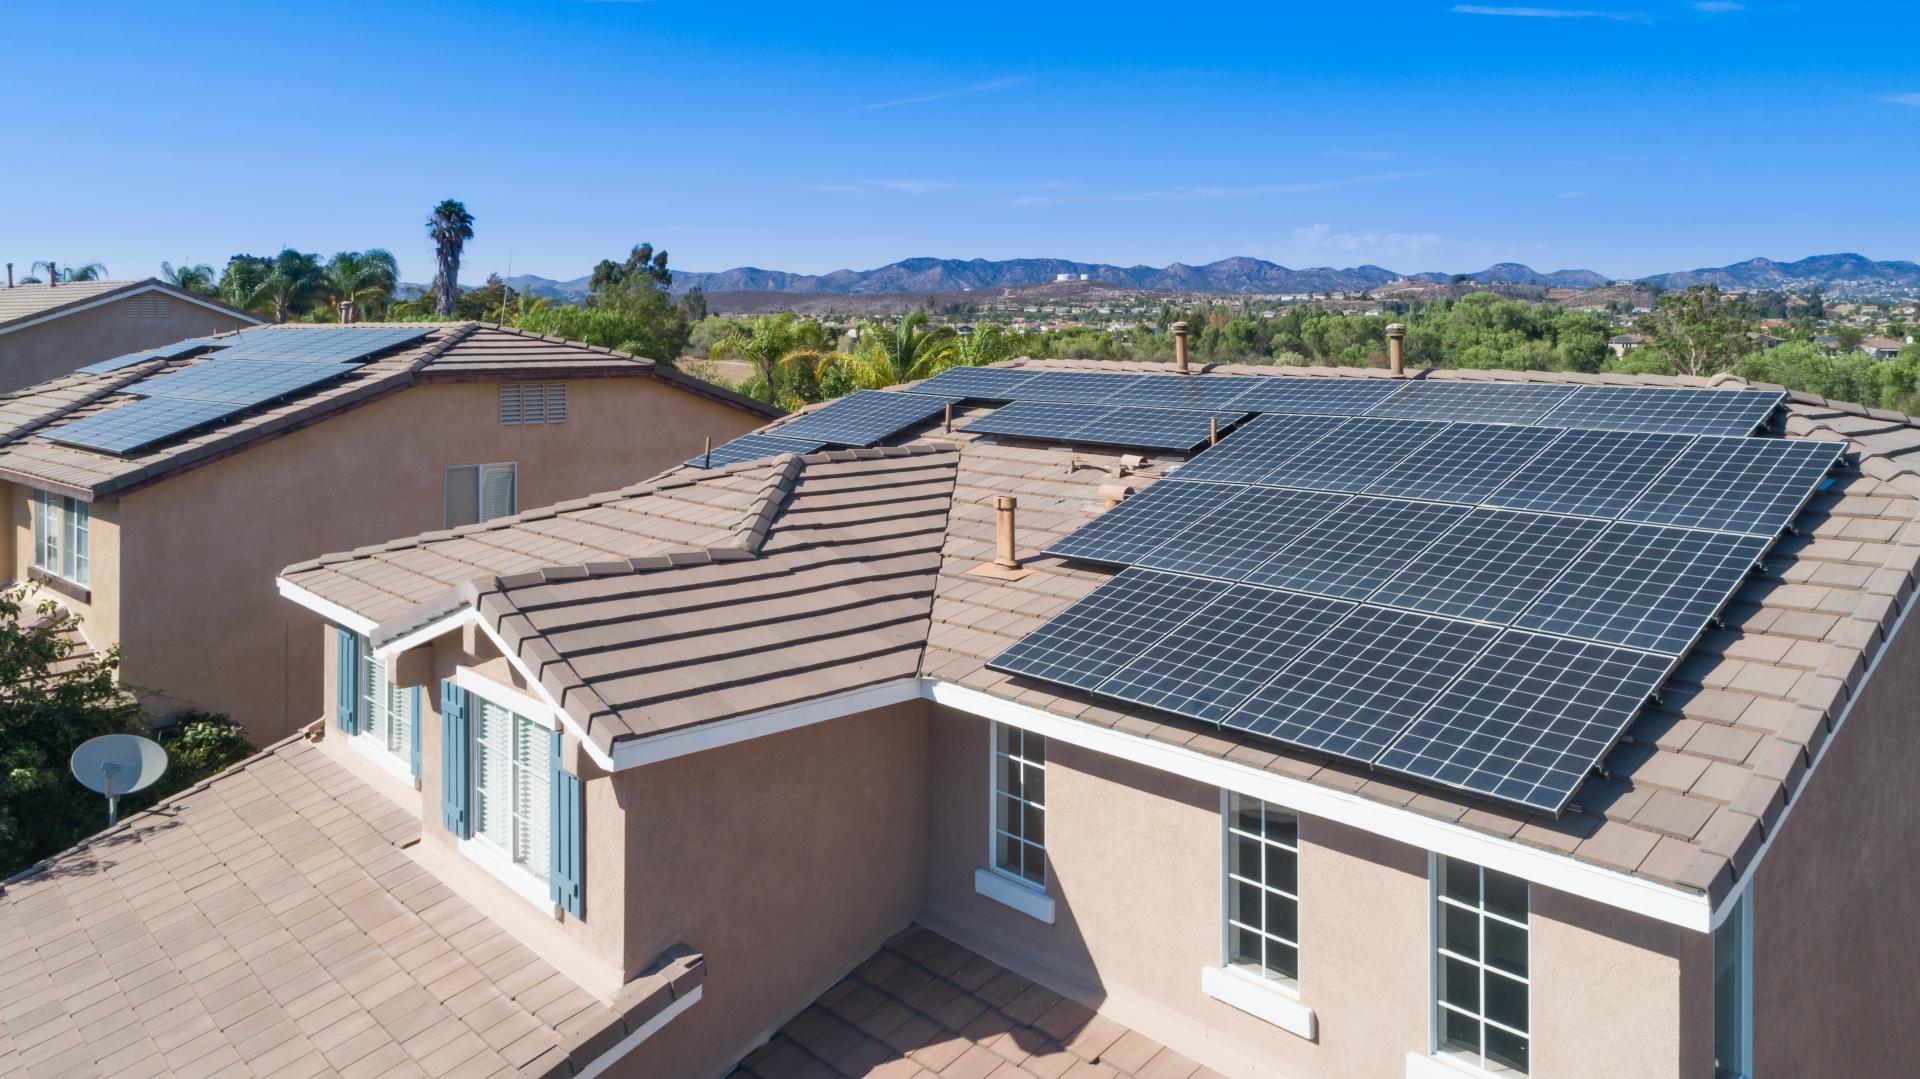 Rooftop solar panels on a house in California.